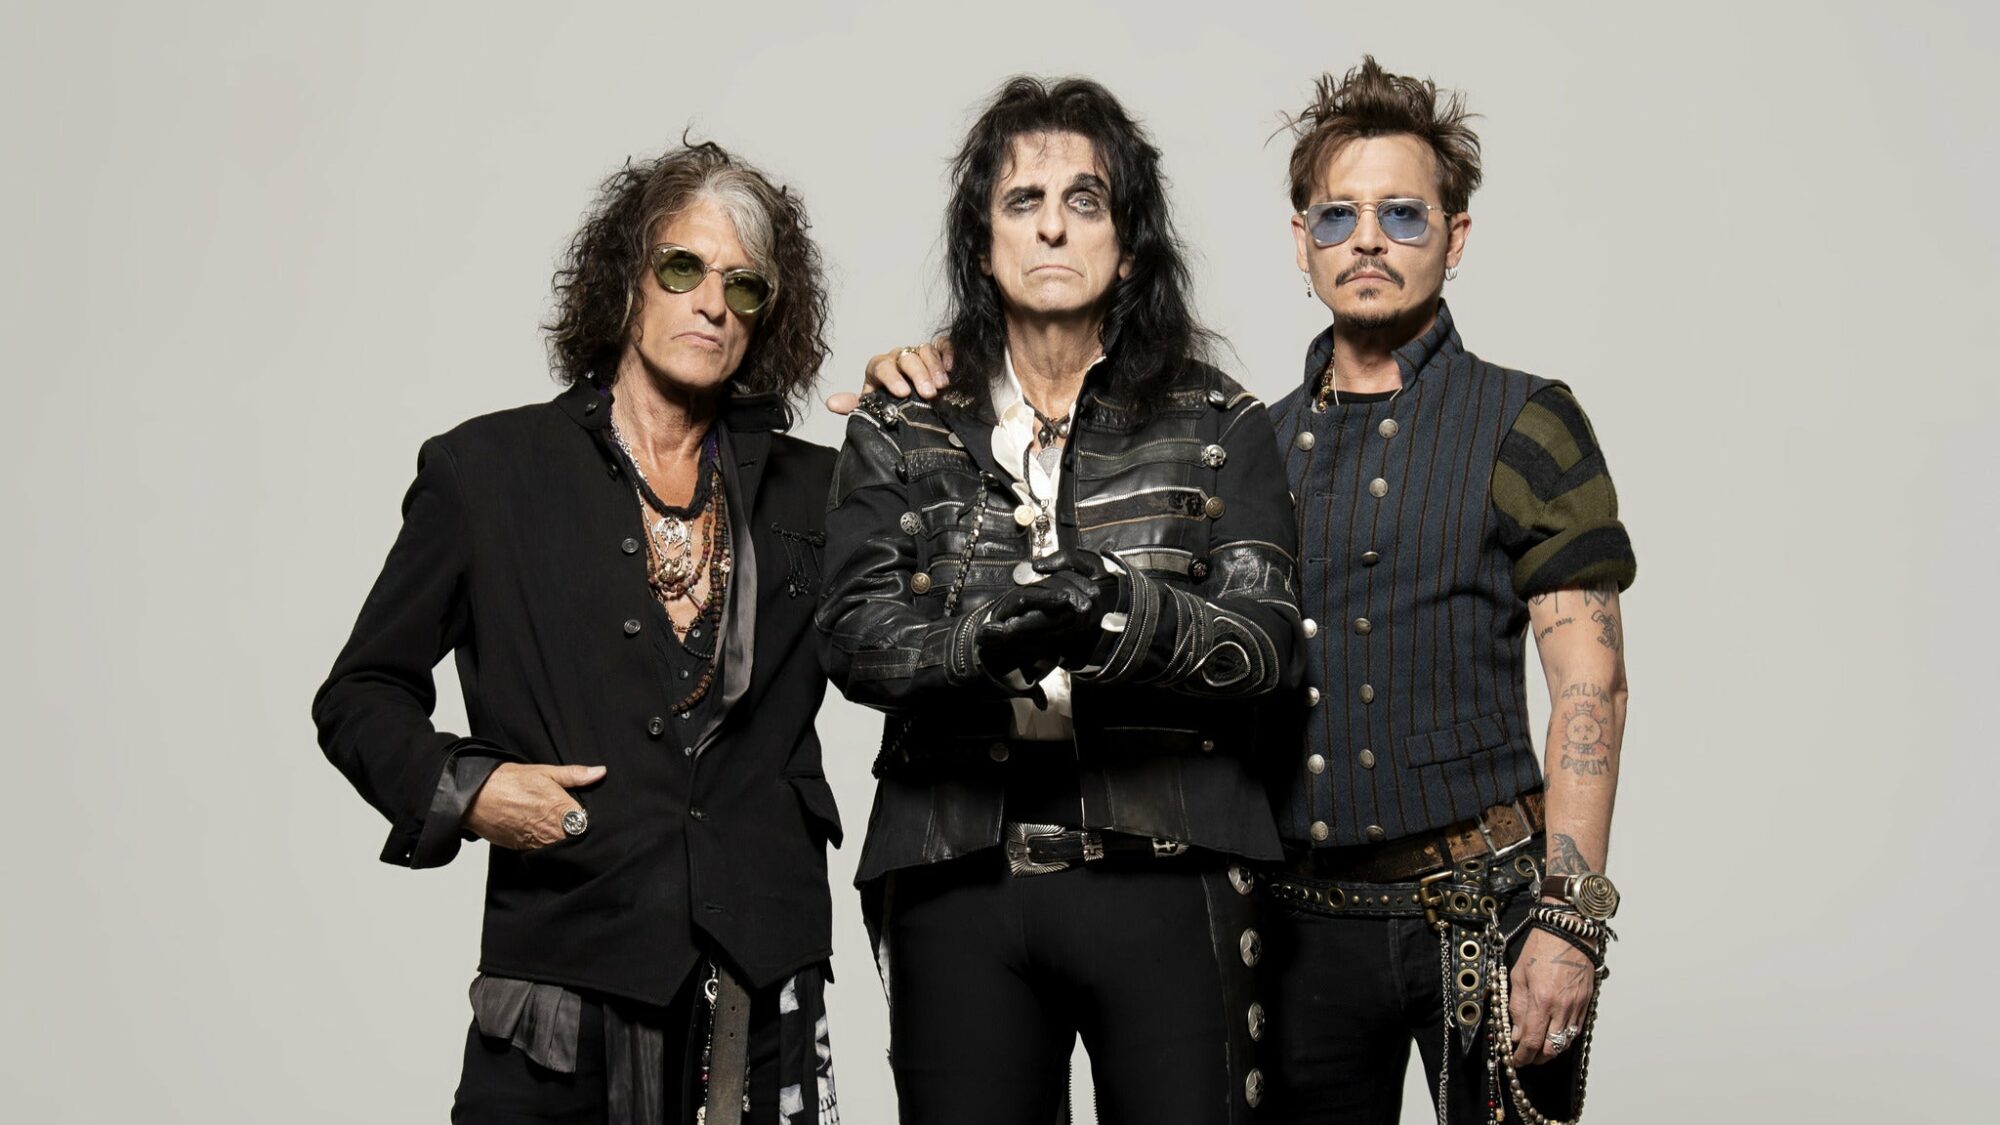 Hollywood Vampires – Ticket + Hotel Packages at Scarborough Open Air Theatre, Scarborough